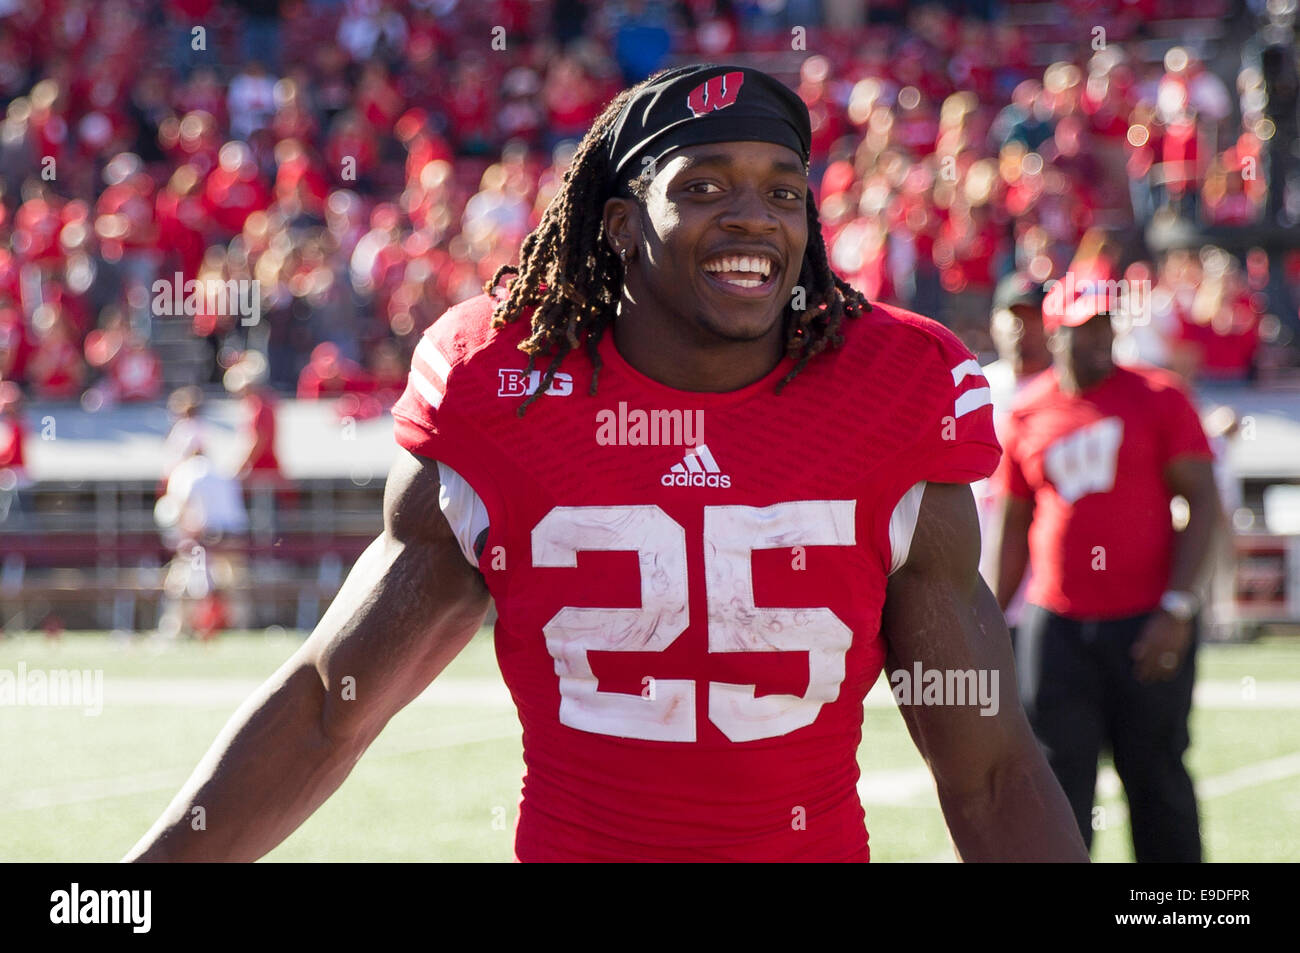 October 25, 2014: Wisconsin Badgers running back Melvin Gordon #25 after the NCAA Football game between the Maryland Terrapins and the Wisconsin Badgers at Camp Randall Stadium in Madison, WI. Wisconsin defeated Maryland 52-7. John Fisher/CSM Stock Photo